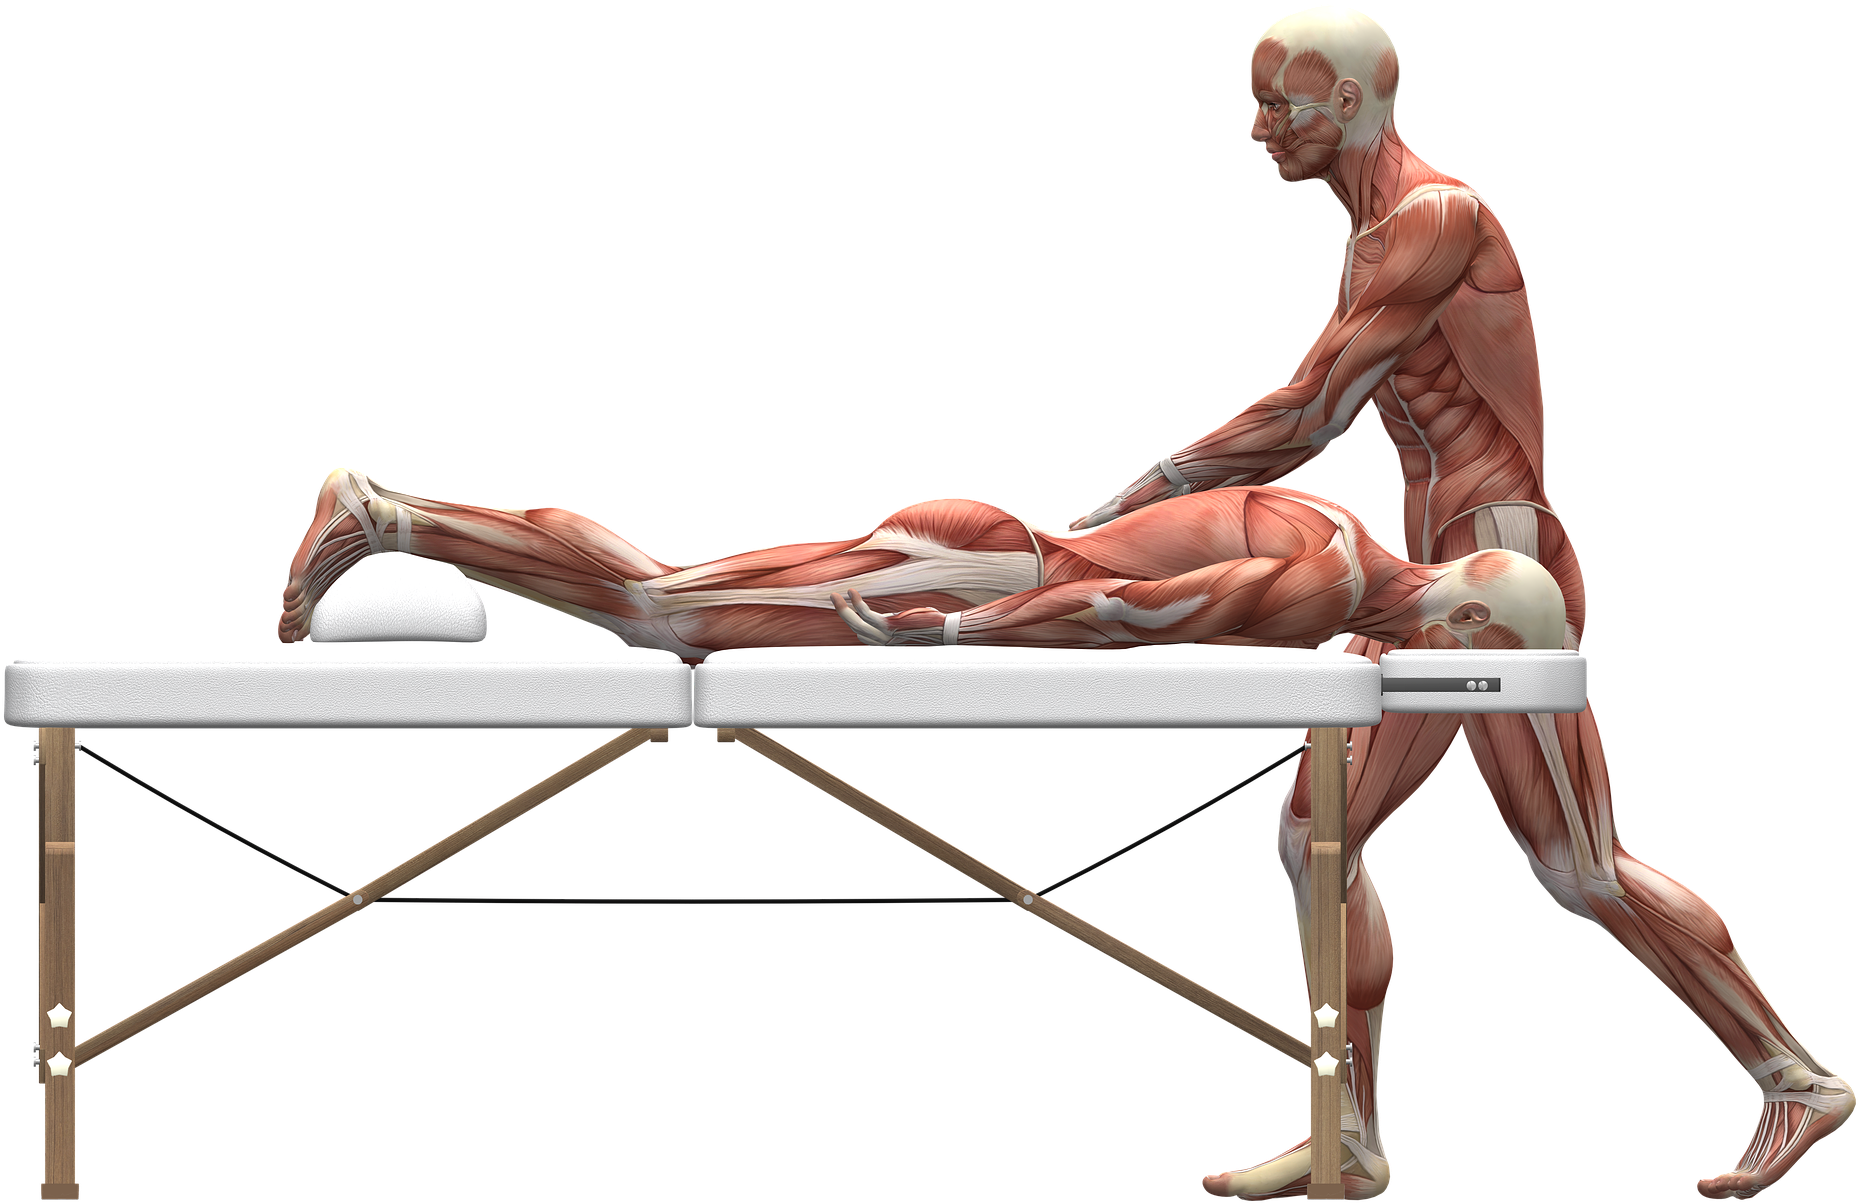 A Man With Muscles On A Massage Table